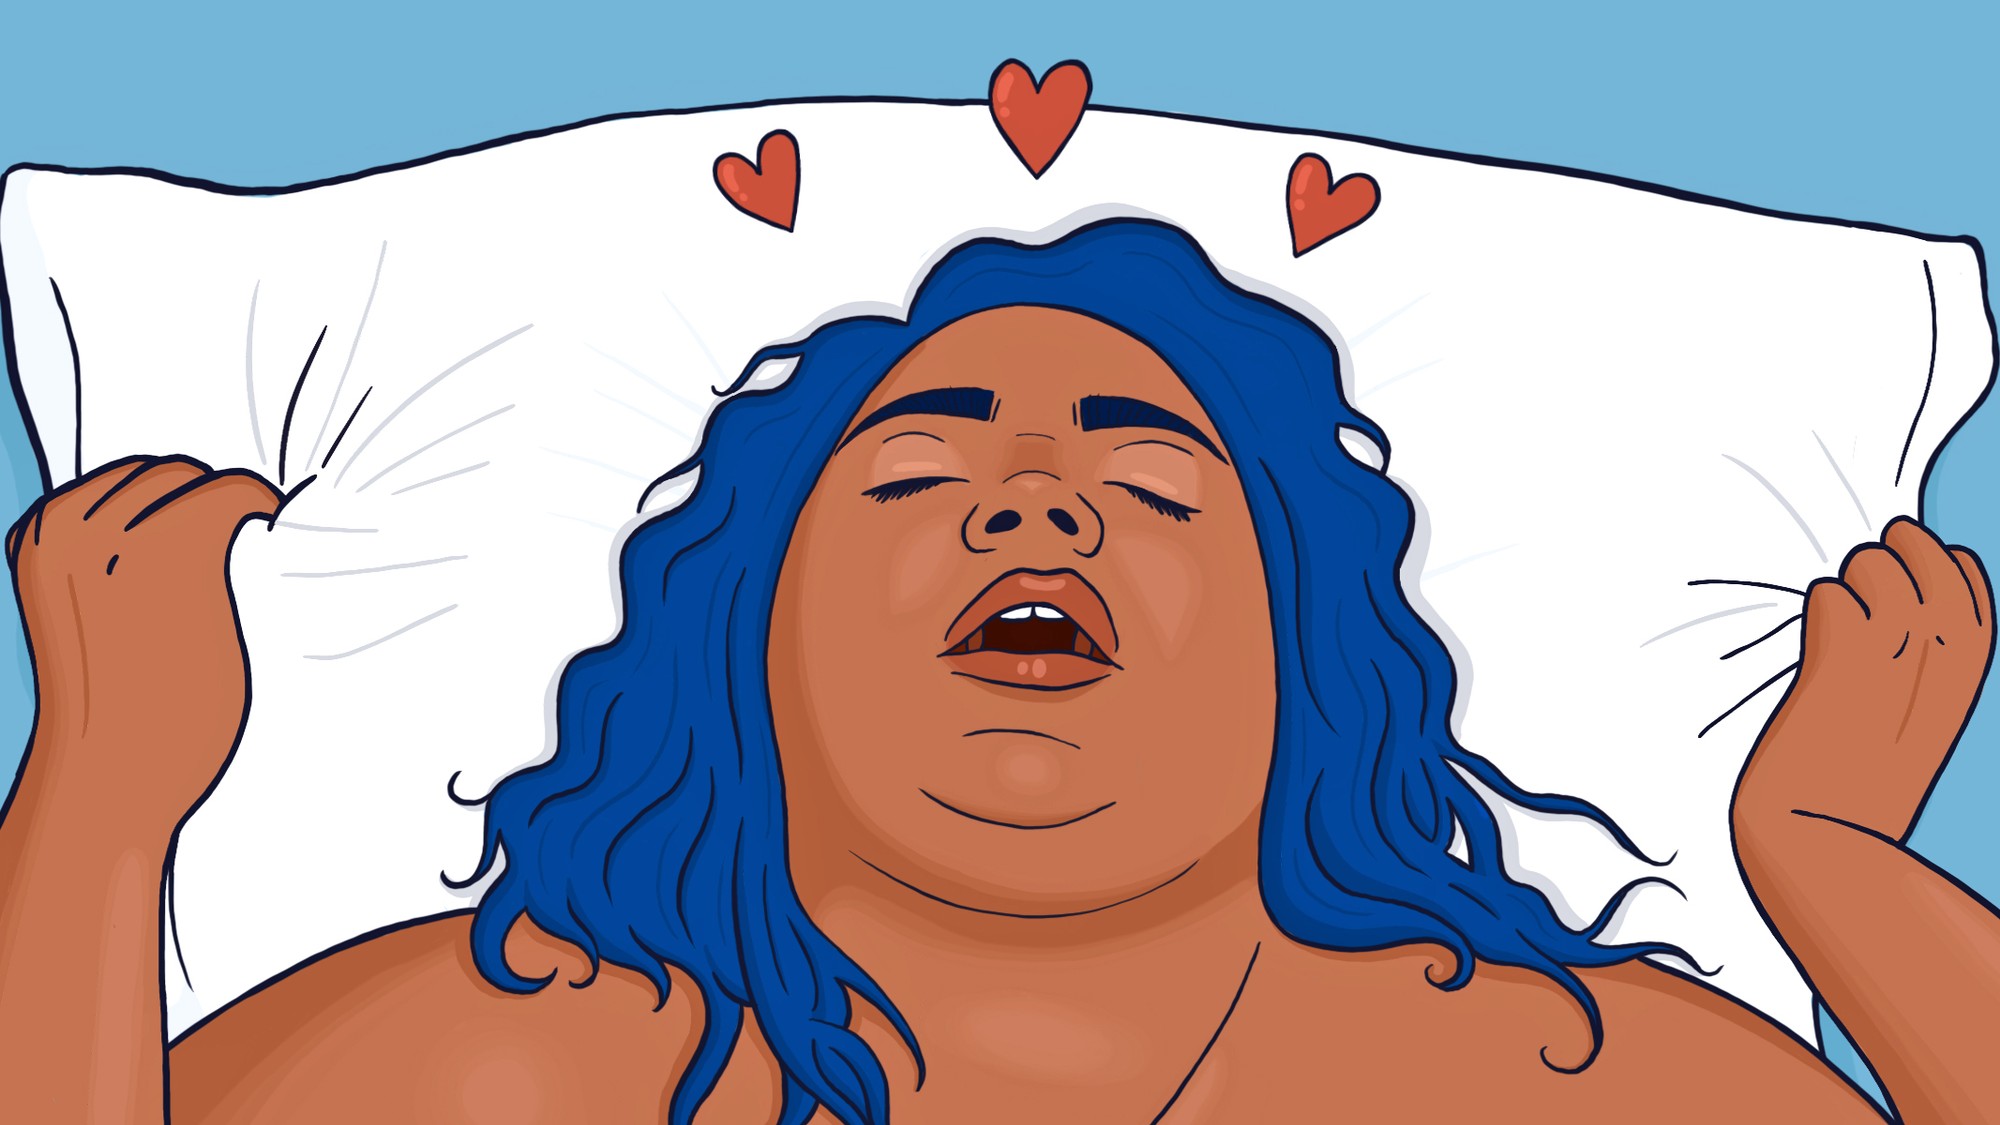 Plump Kinky Sex - How to Have Sex With a Fat Girl - VICE